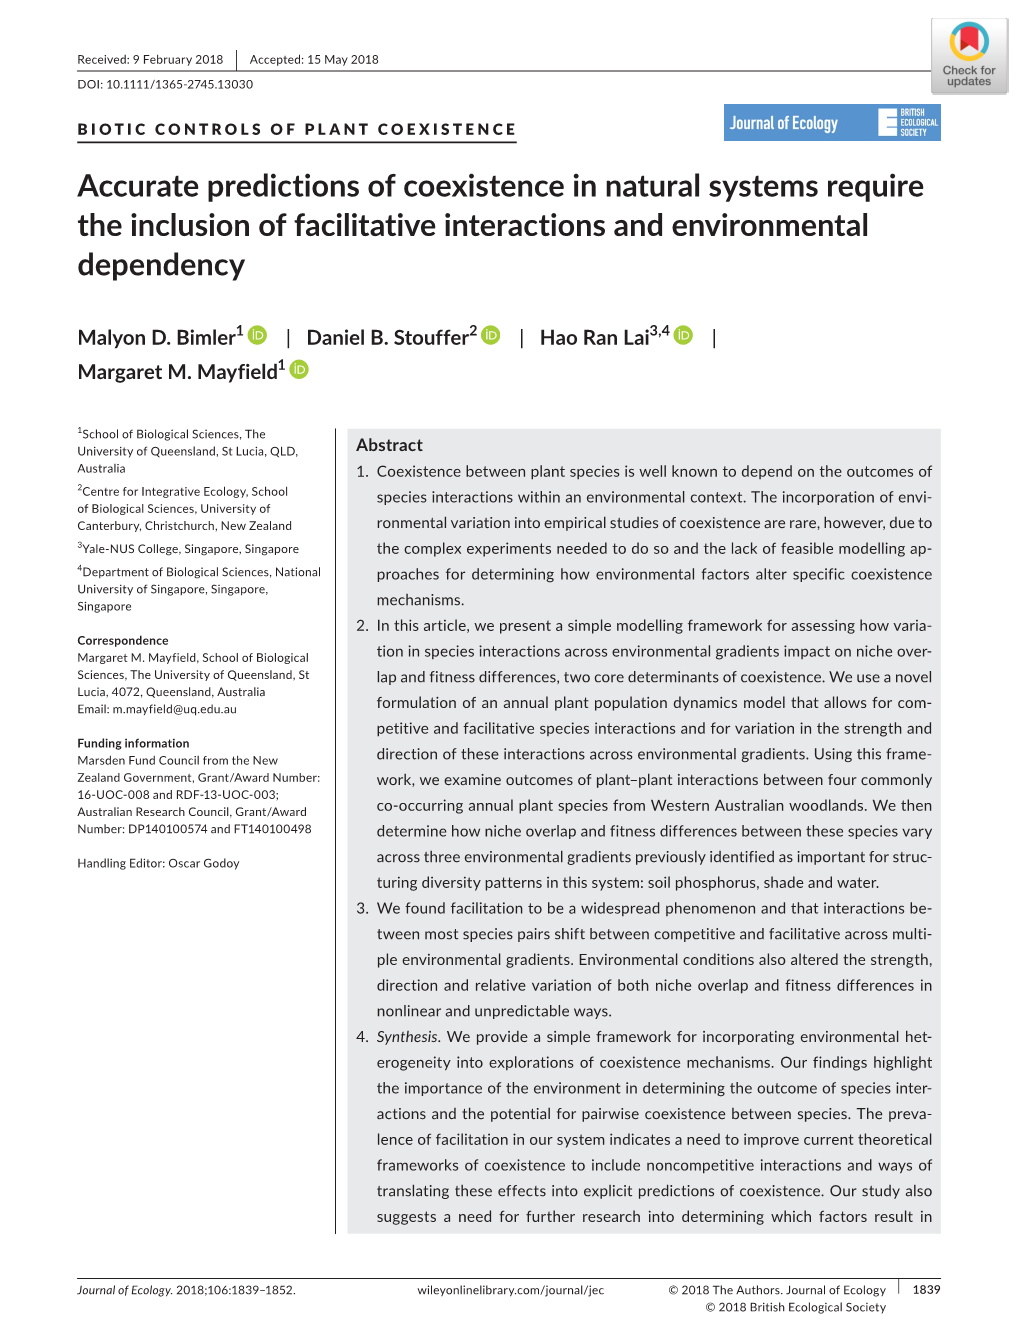 Accurate Predictions of Coexistence in Natural Systems Require the Inclusion of Facilitative Interactions and Environmental Dependency